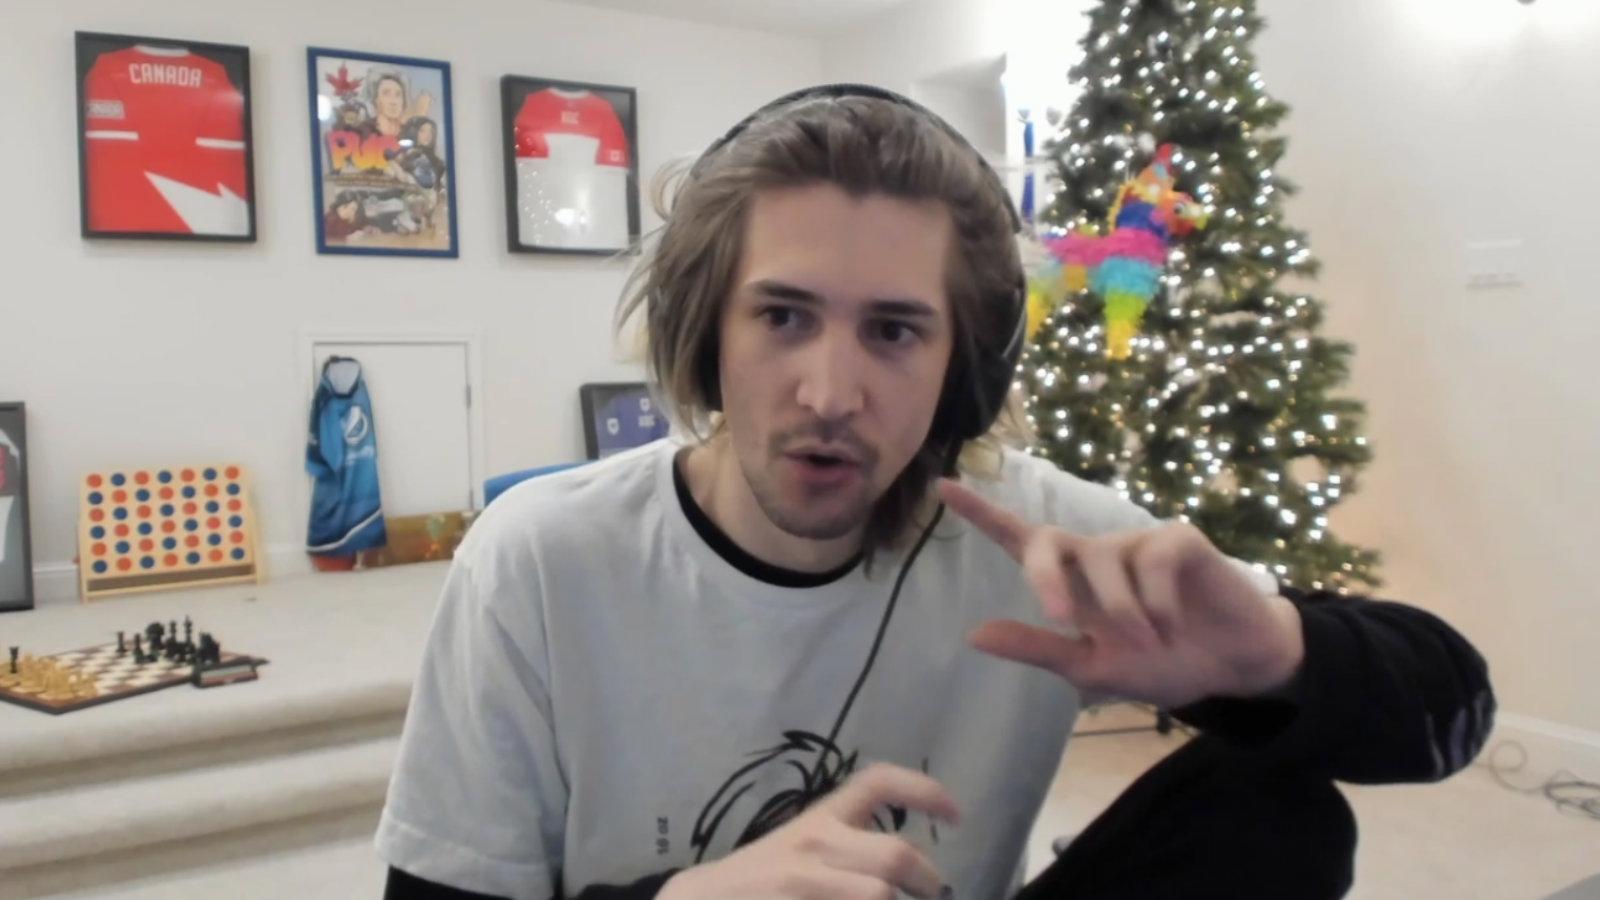 xQc returns to Twitch after ban